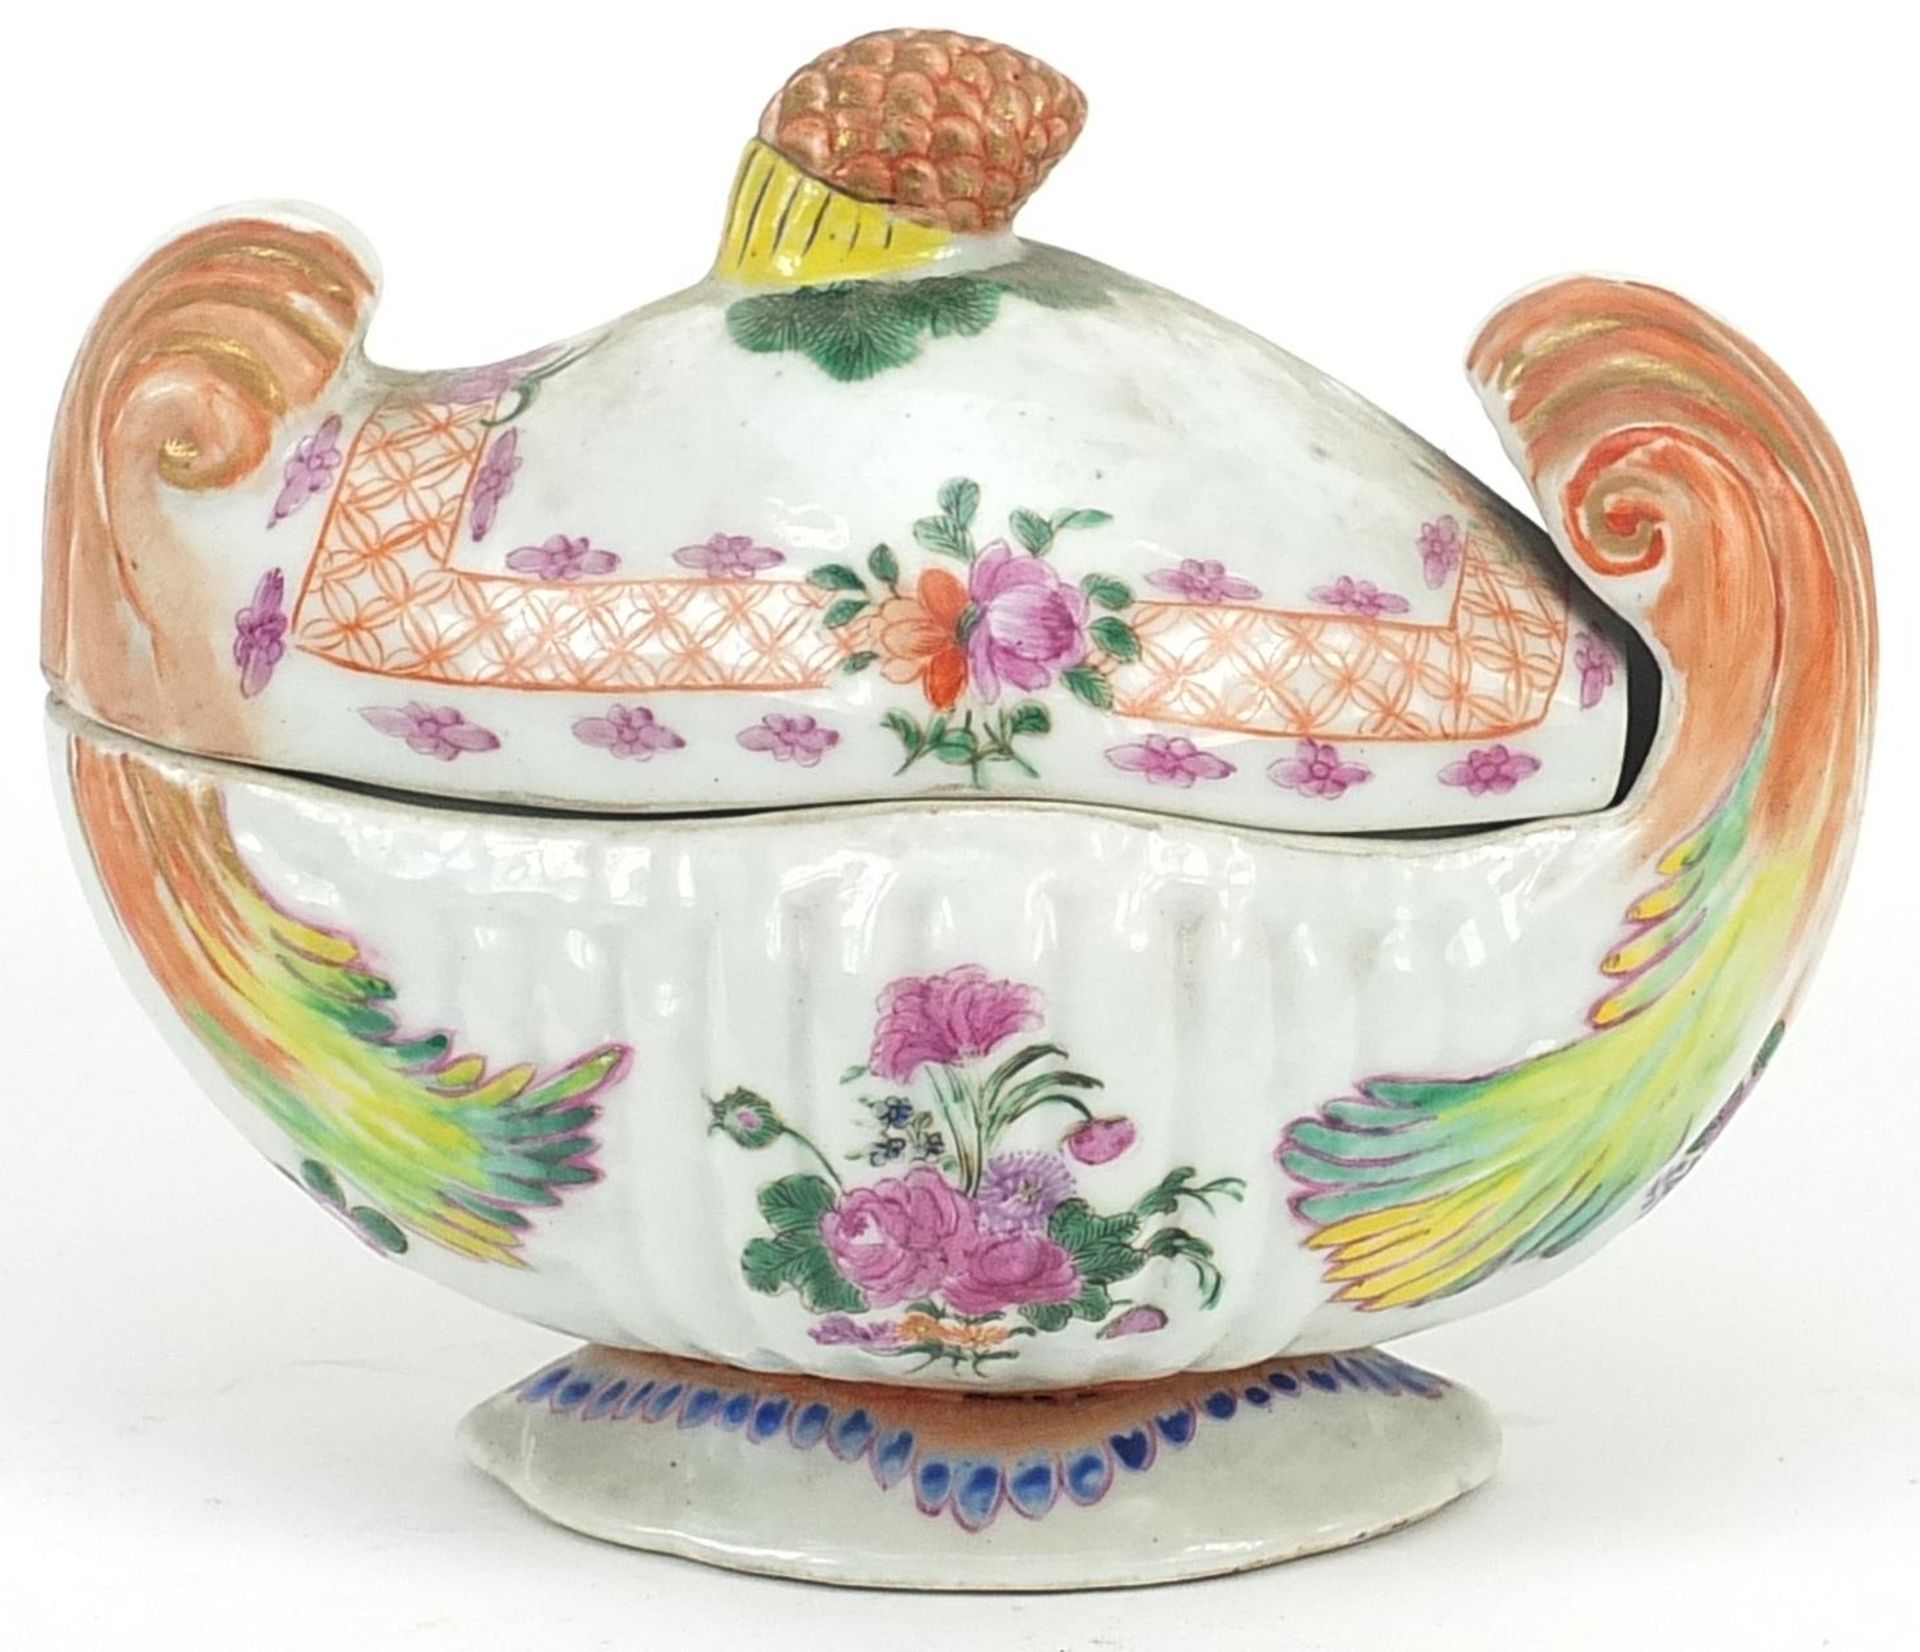 Chinese porcelain sauce tureen with pineapple finial hand painted in the famille rose palette with